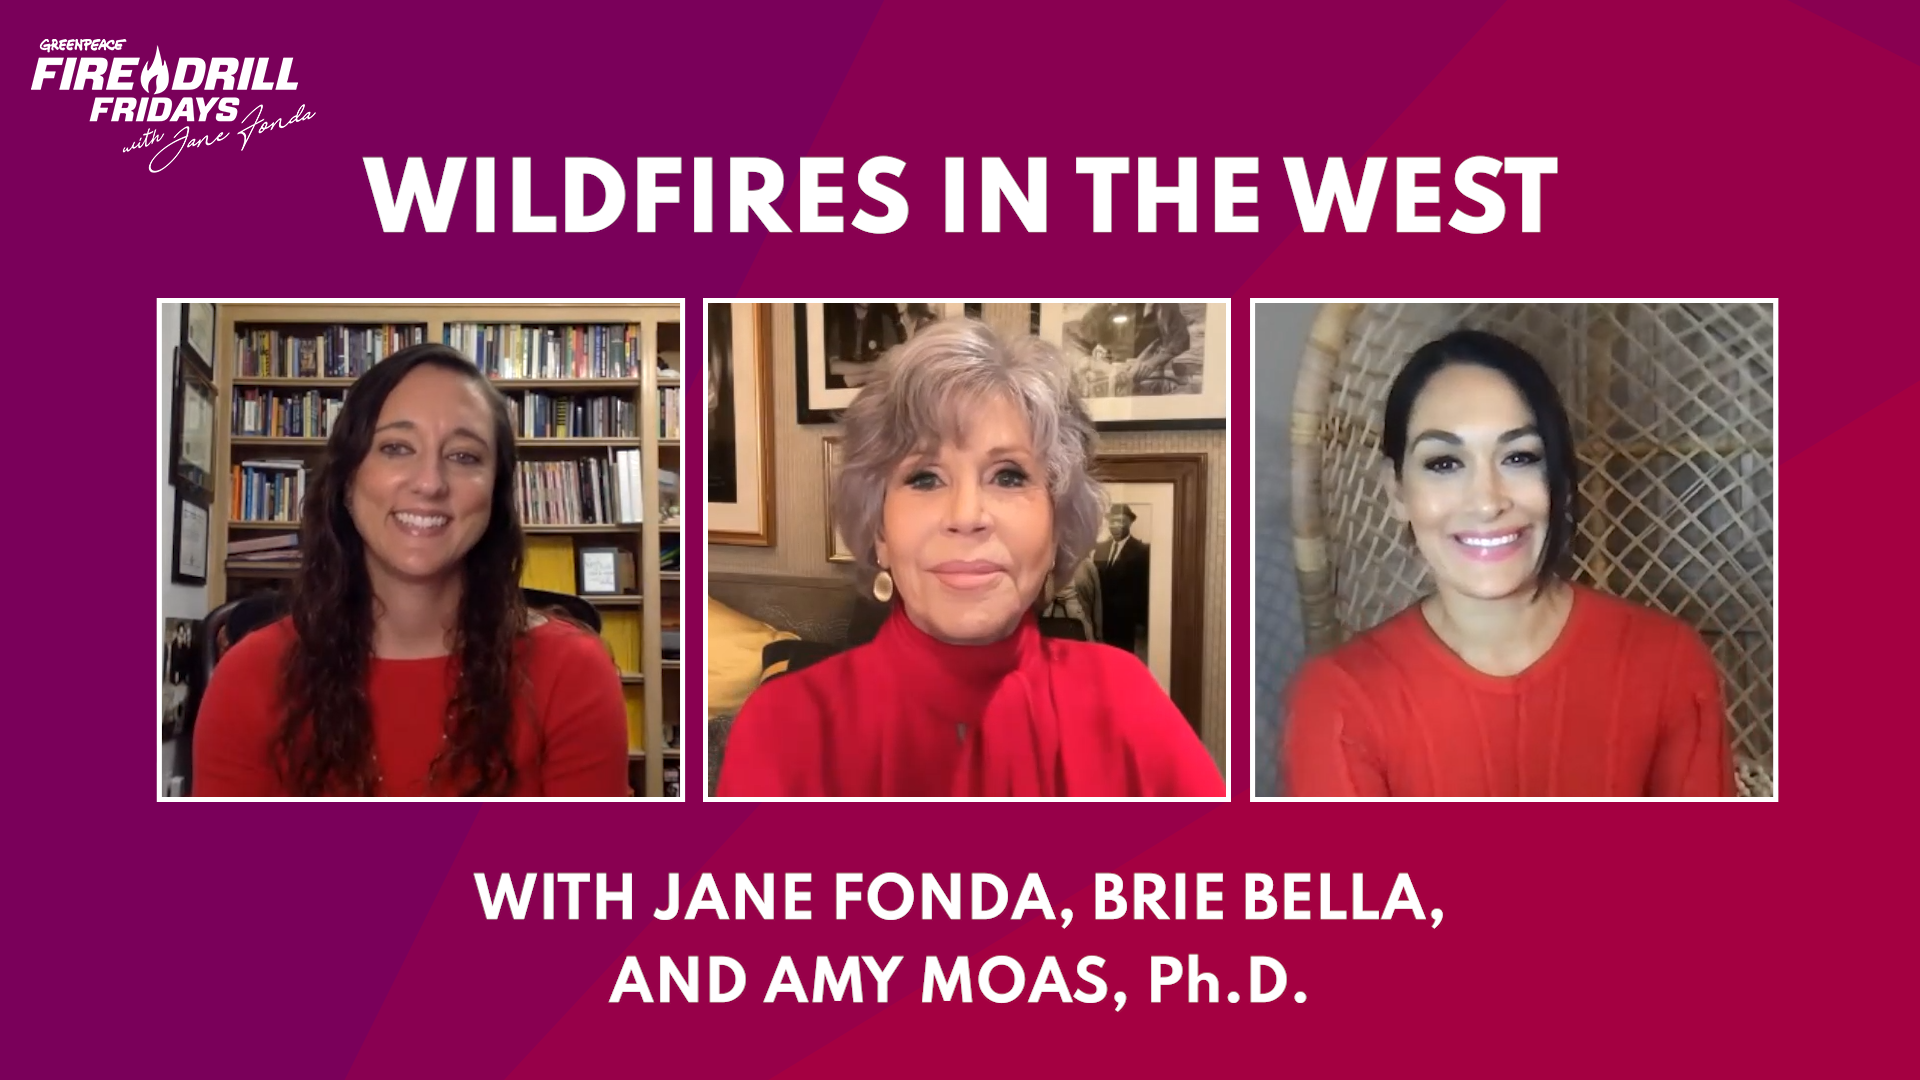 Watch Jane Fonda, Brie Bella, and Amy Moas, Ph.D. Discuss Climate-Driven Wildfires in the Western United States